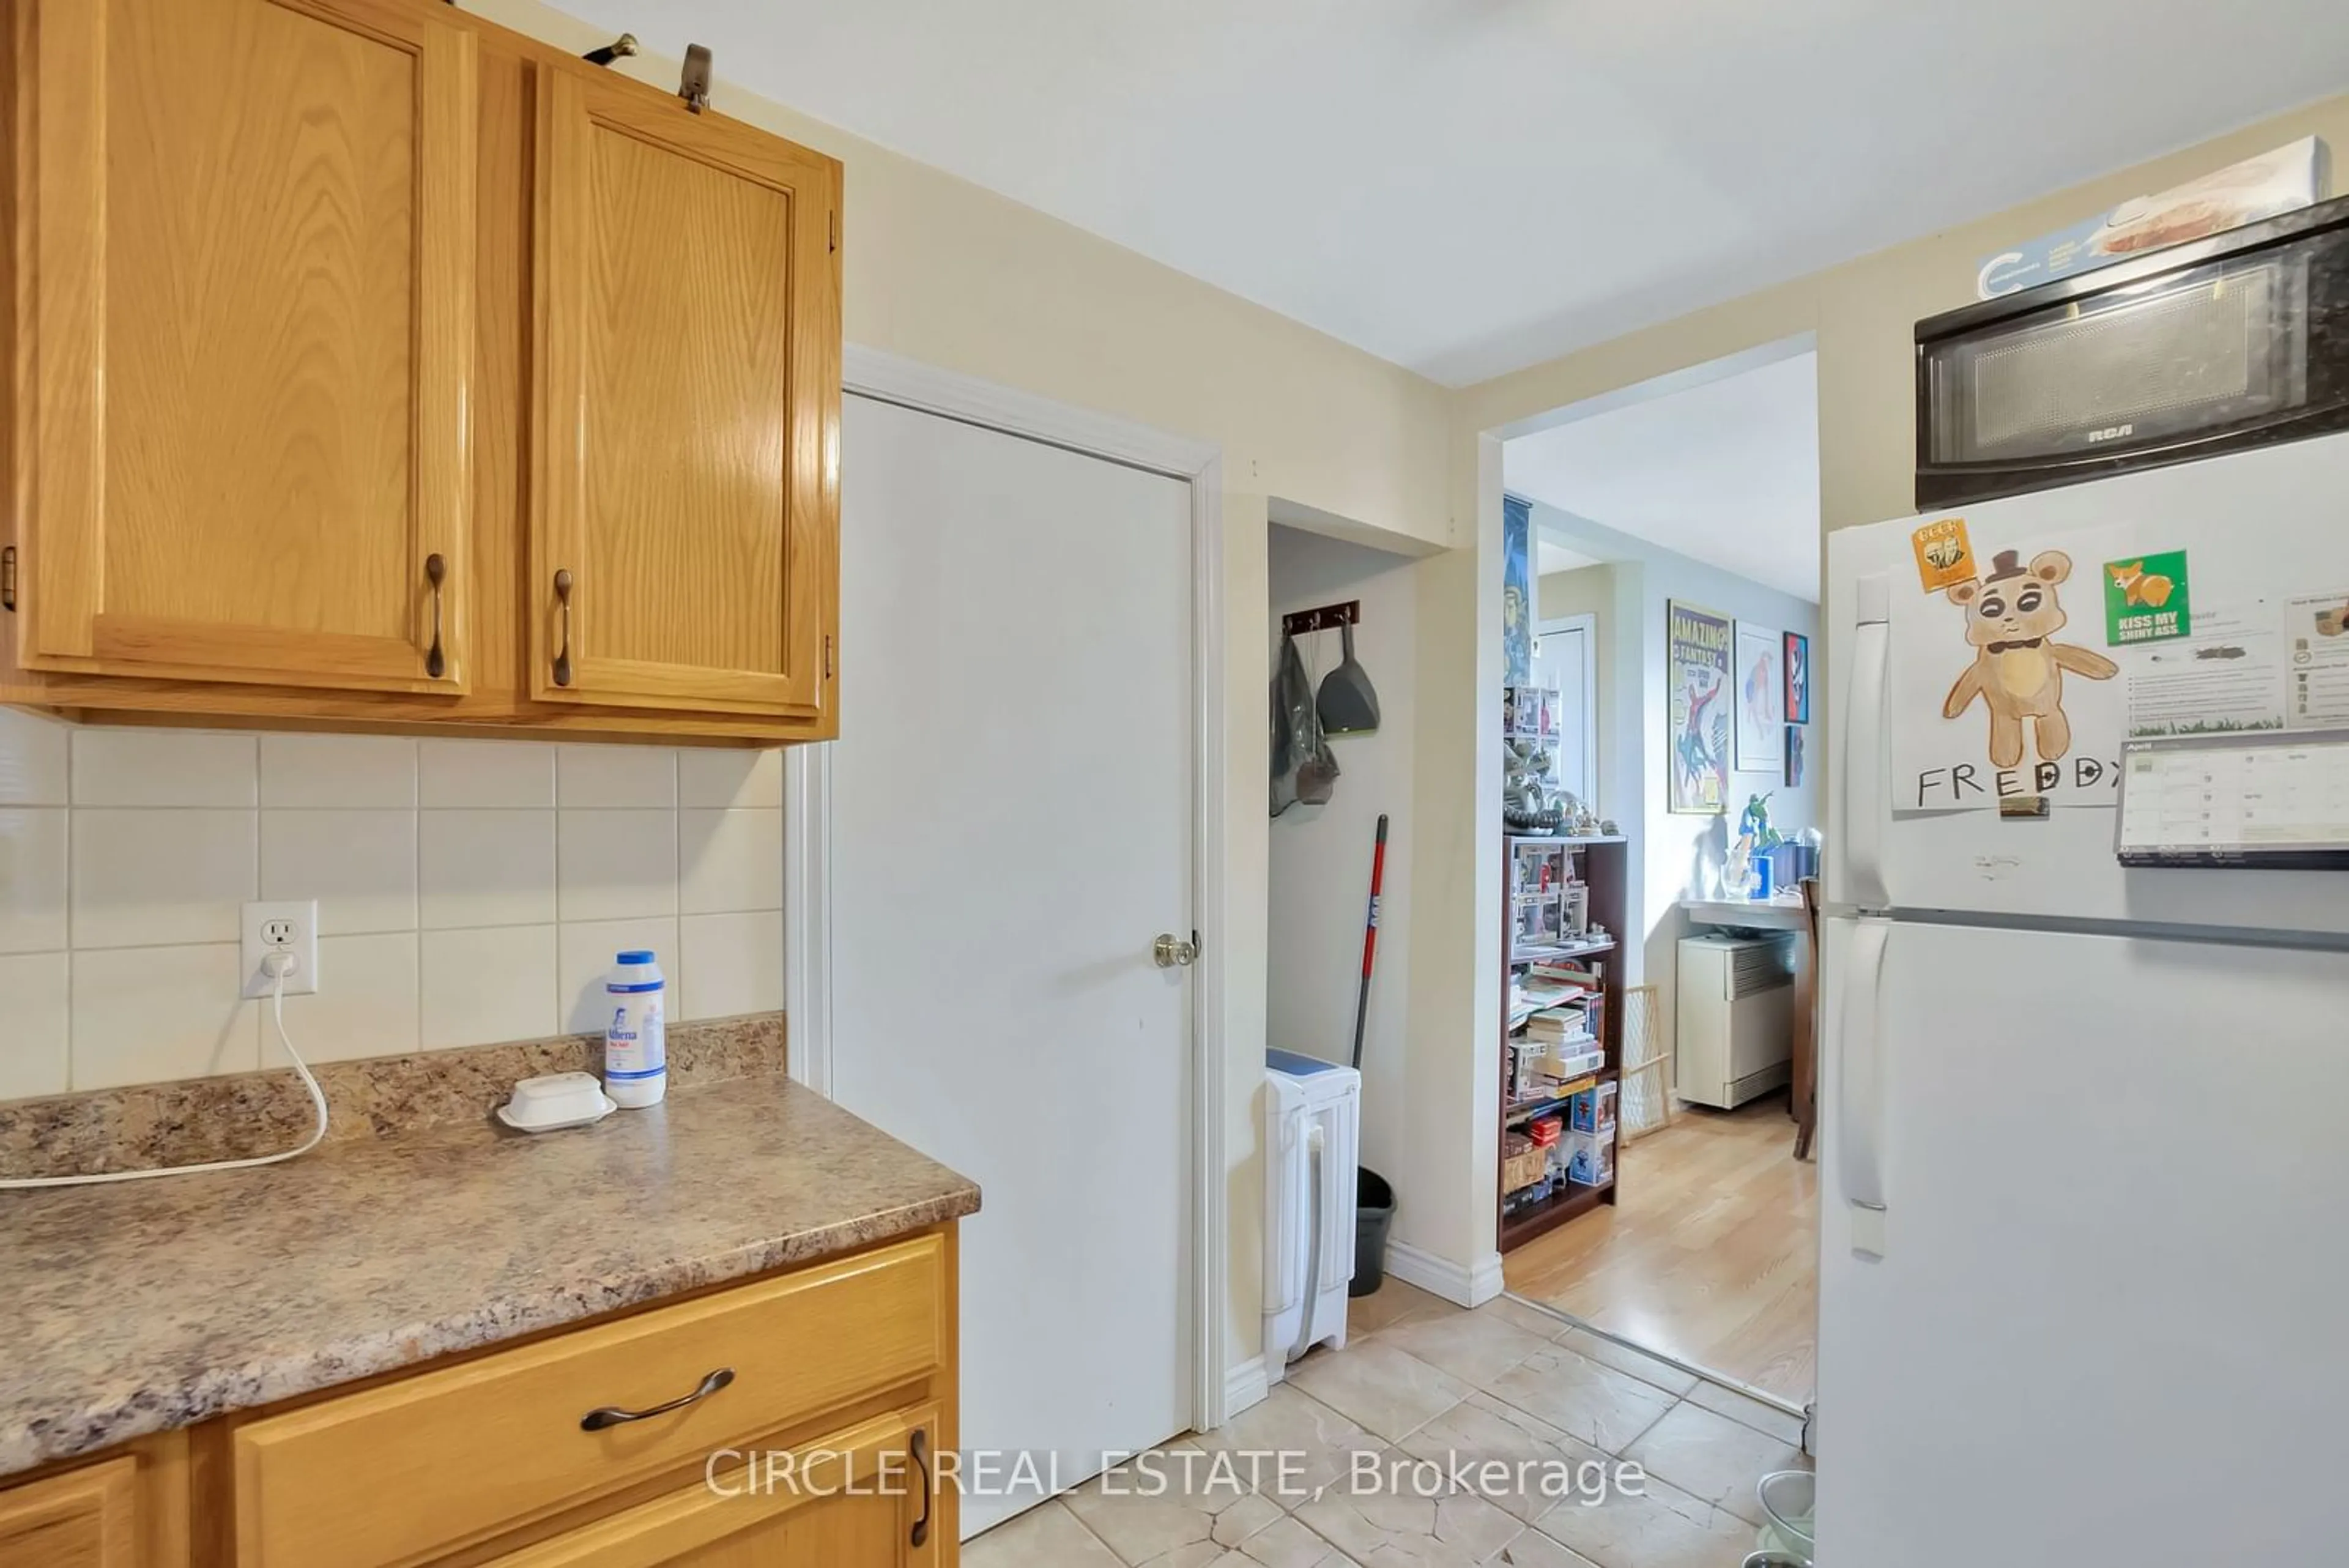 Kitchen with laundary machines for 1162 Richmond St #1160, Windsor Ontario N9A 4A4